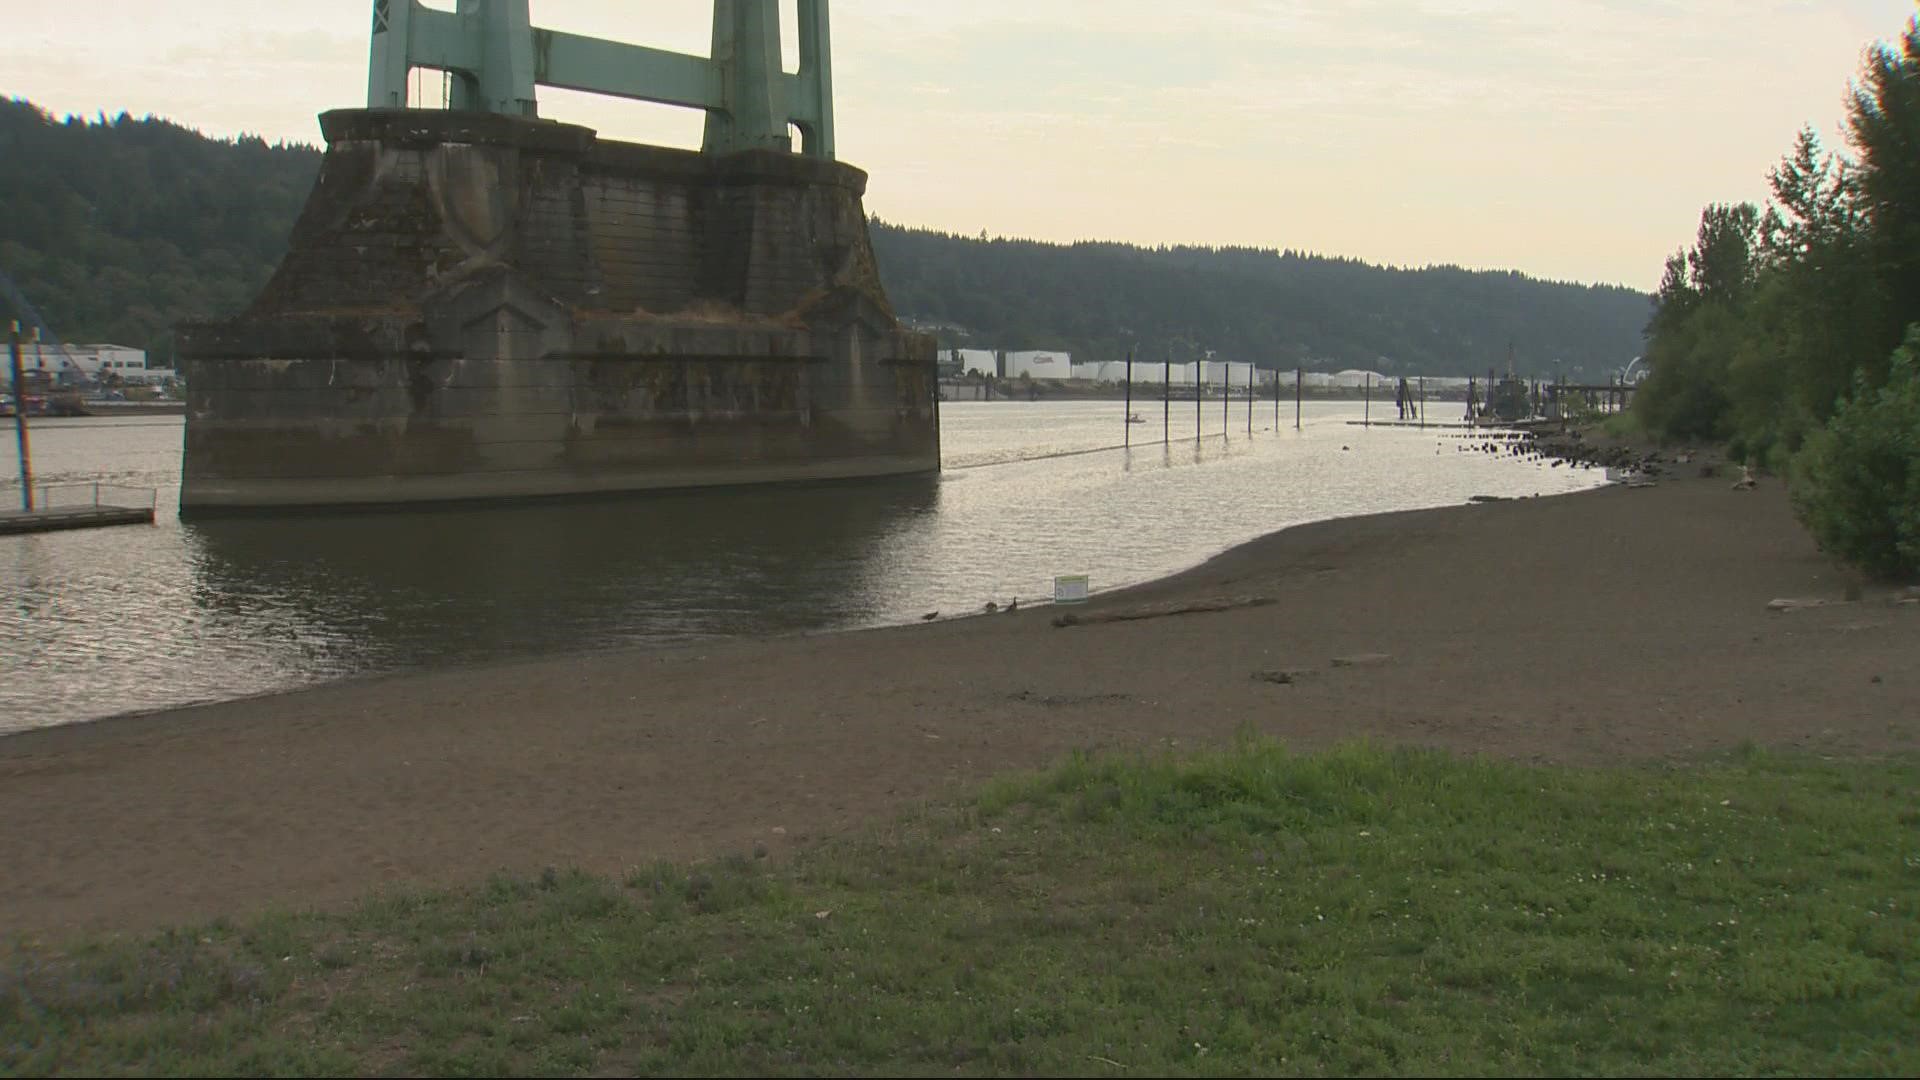 The Willamette River near Cathedral Park is currently home to a toxic algae bloom, making the water unsafe to touch and especially ingest.